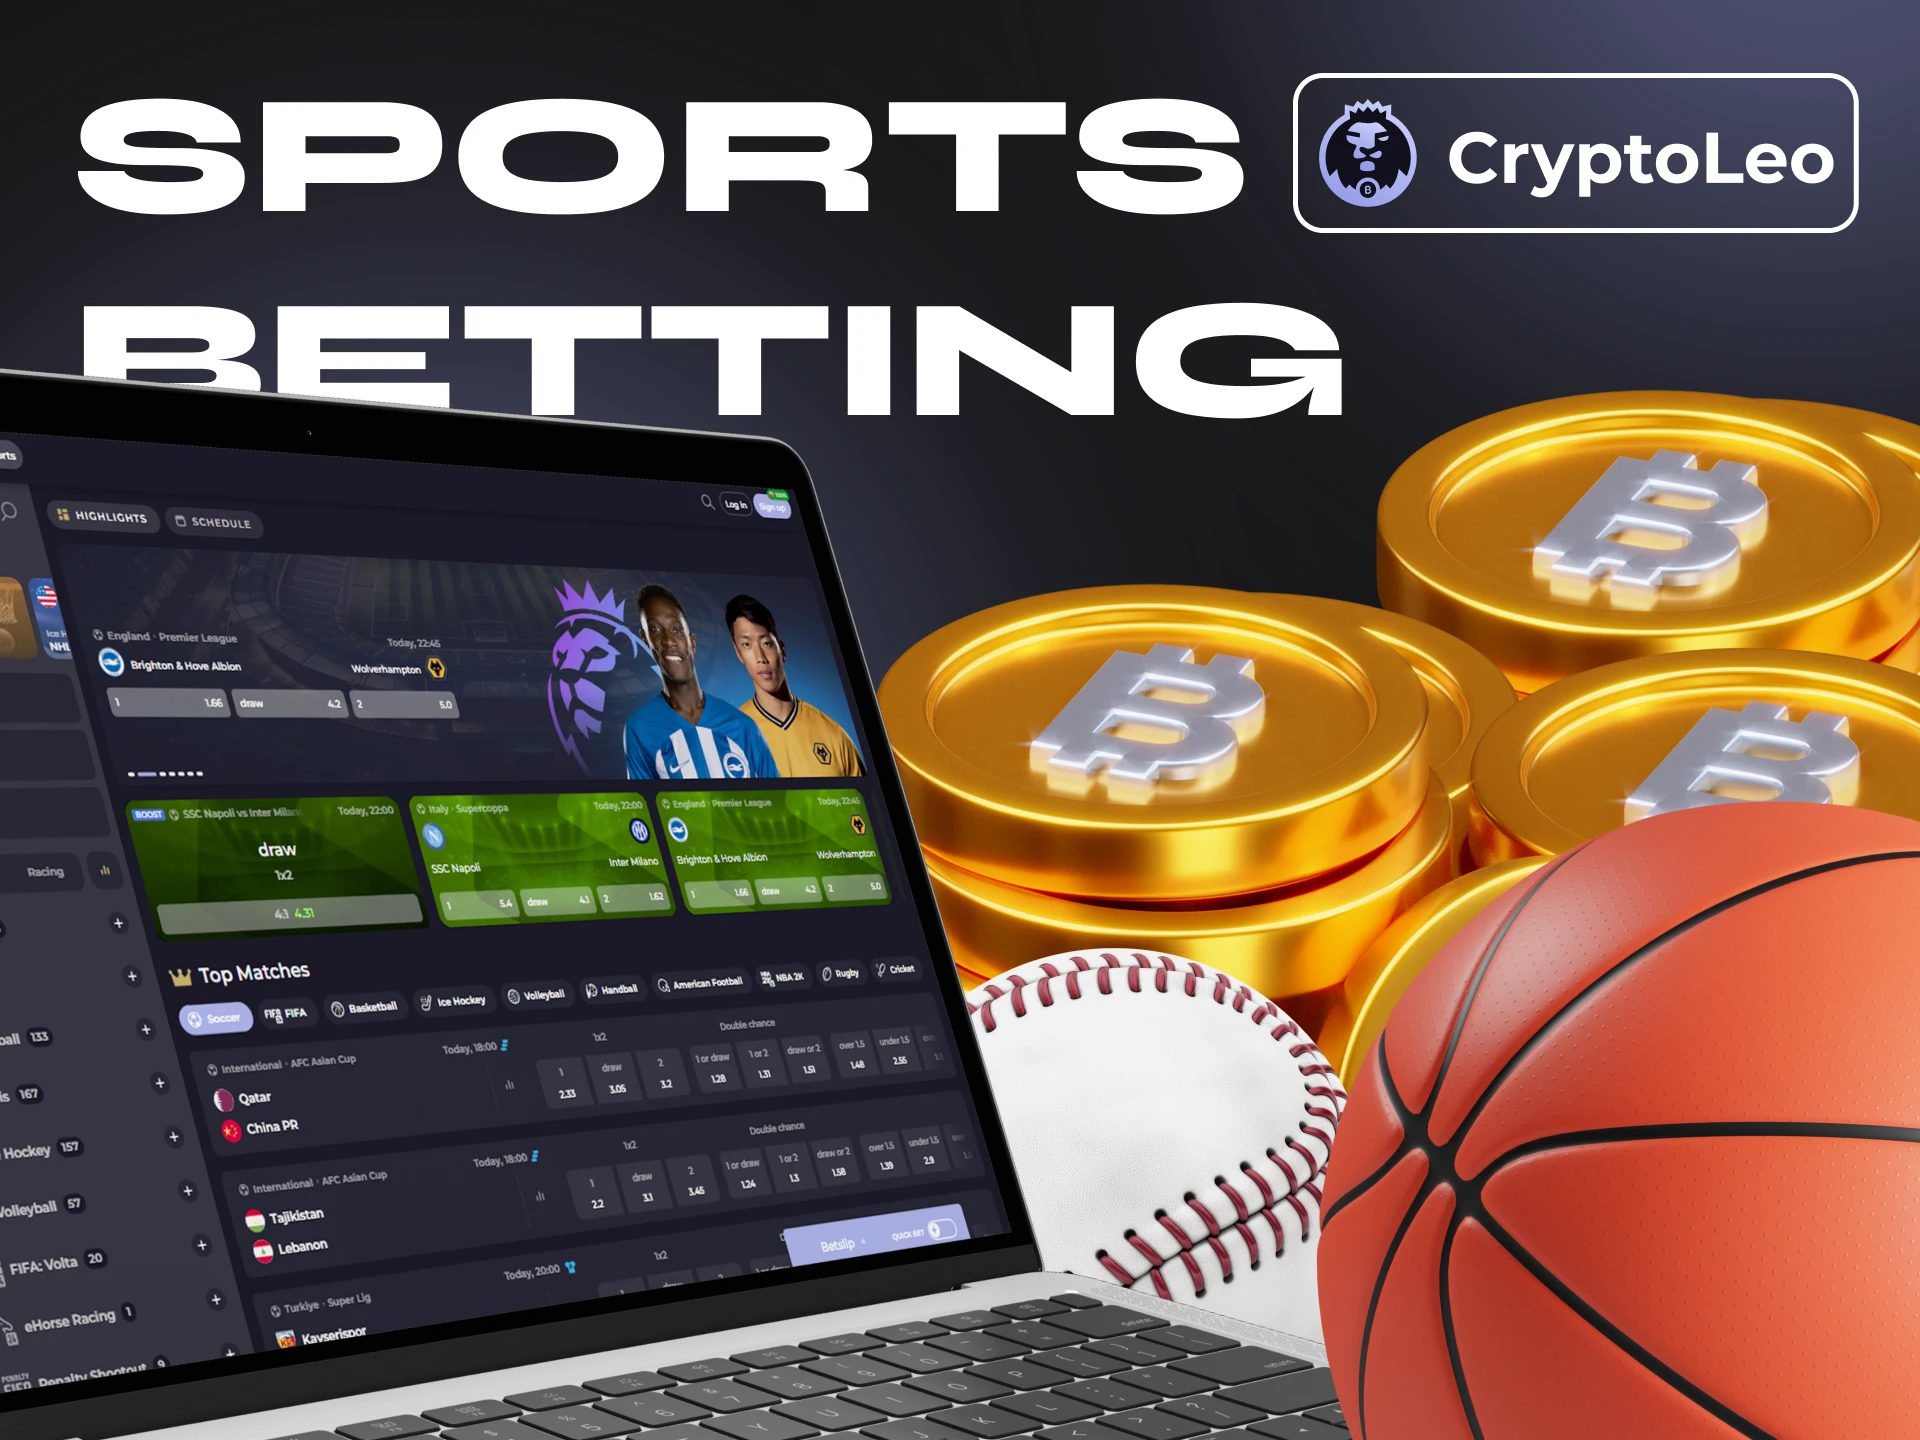 Place bets on your favorite sporting events and teams with Cryptoleo.